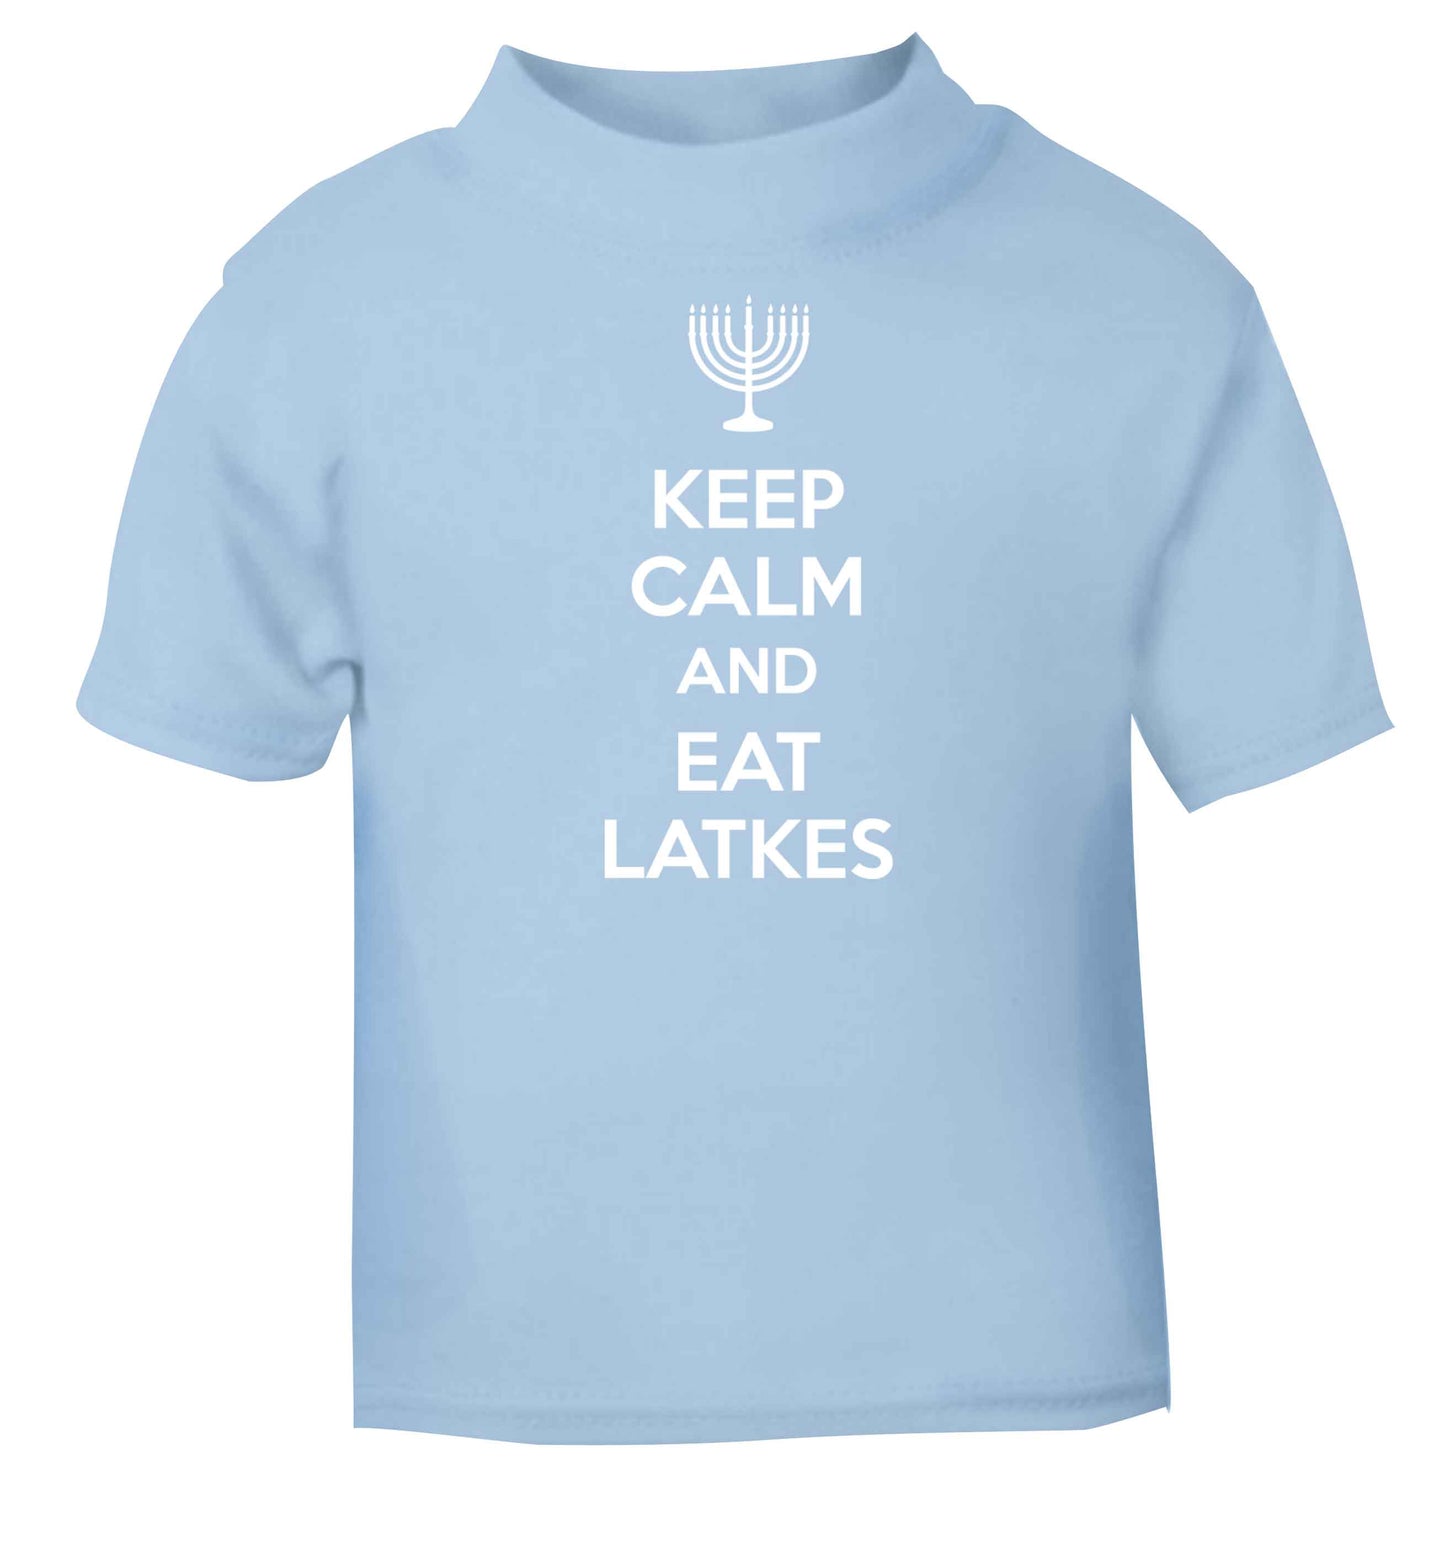 Keep calm and eat latkes light blue baby toddler Tshirt 2 Years